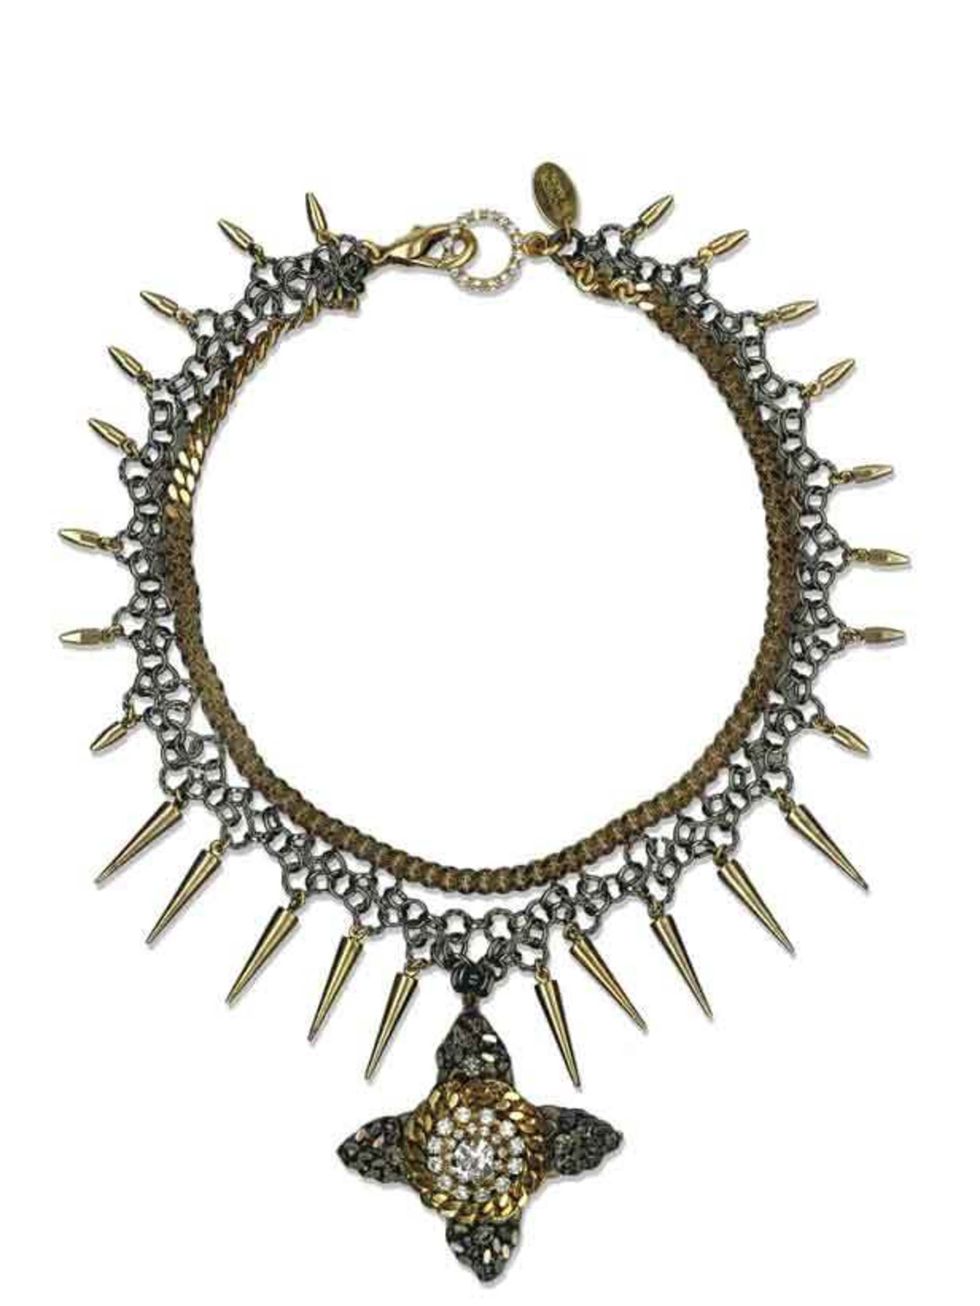 <p>Erickson Beamon for Urban Outfitters spike necklace, £165, at <a href="http://www.urbanoutfitters.co.uk/erickson-beamon-spike-necklace/invt/5762455601992/">Urban Outfitters</a> </p>